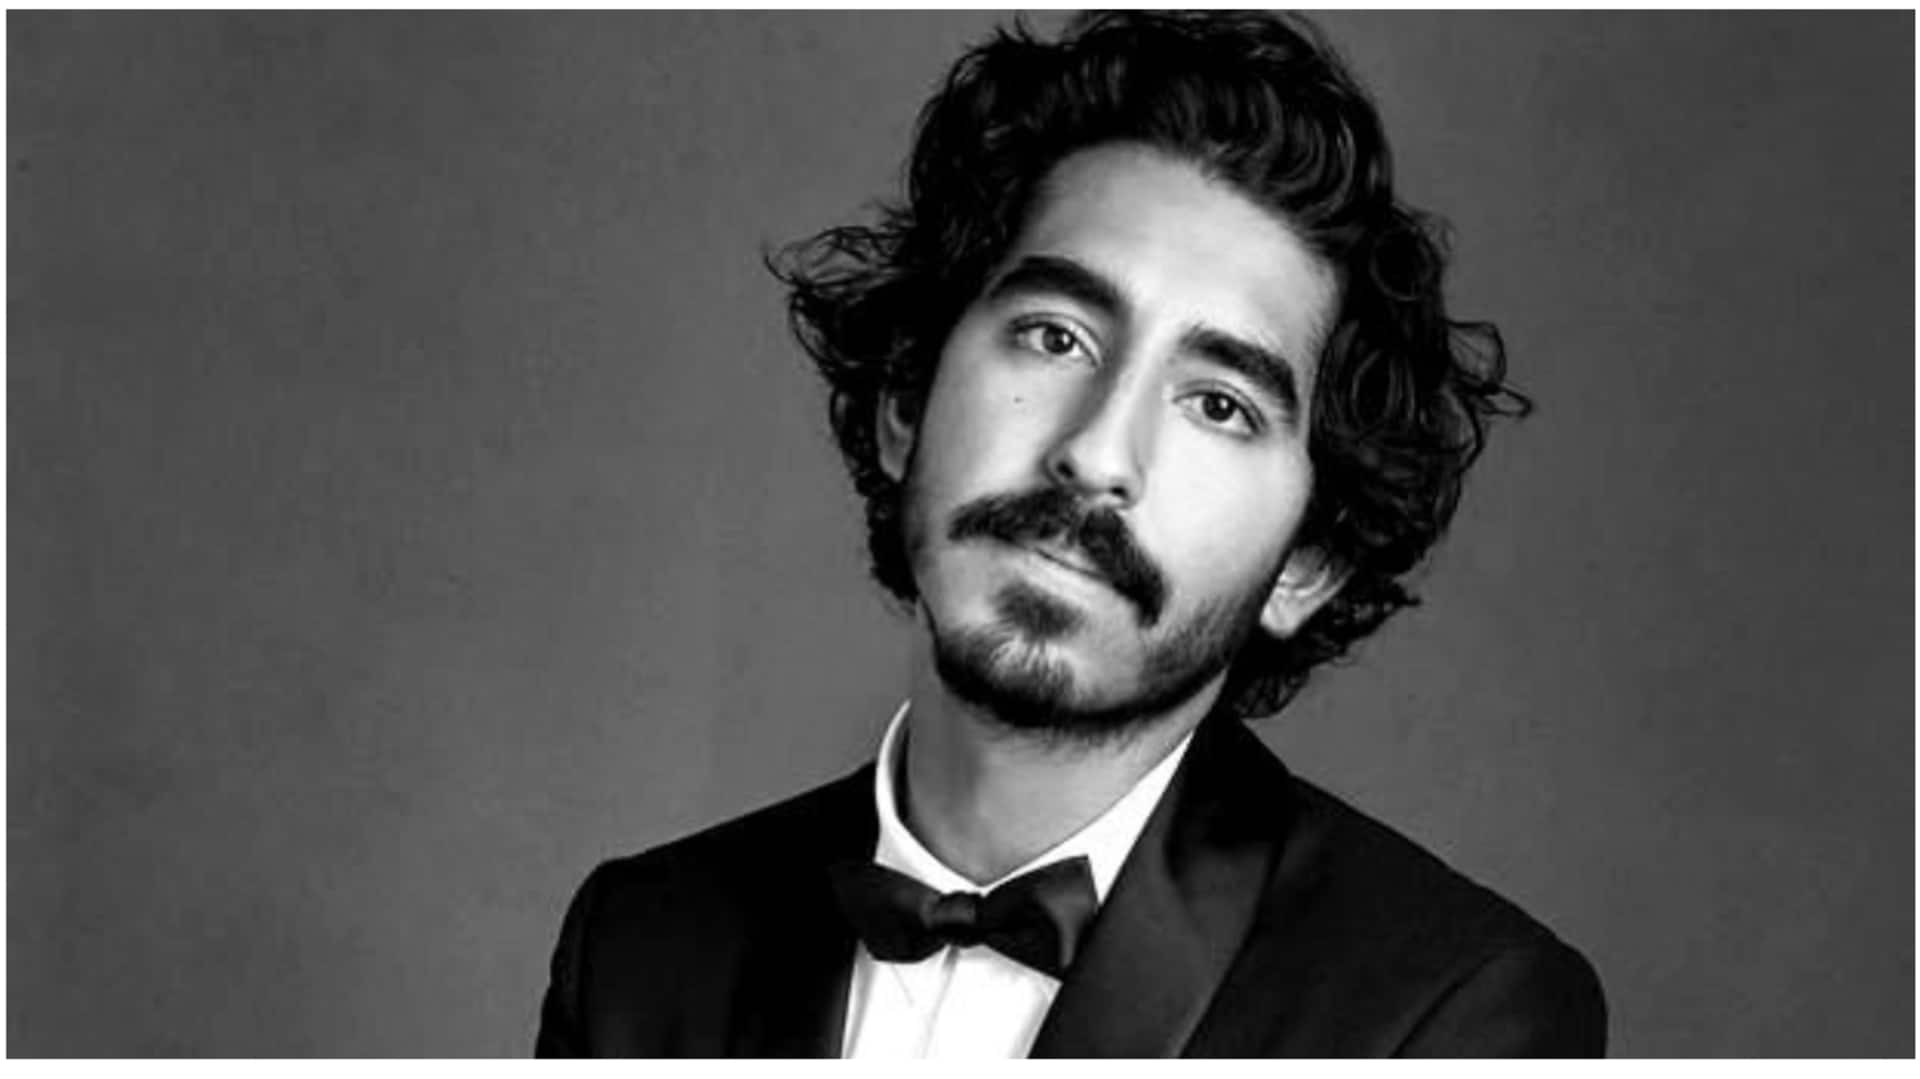 Dev Patel birthday special: 5 must-watch movies starring talented actor